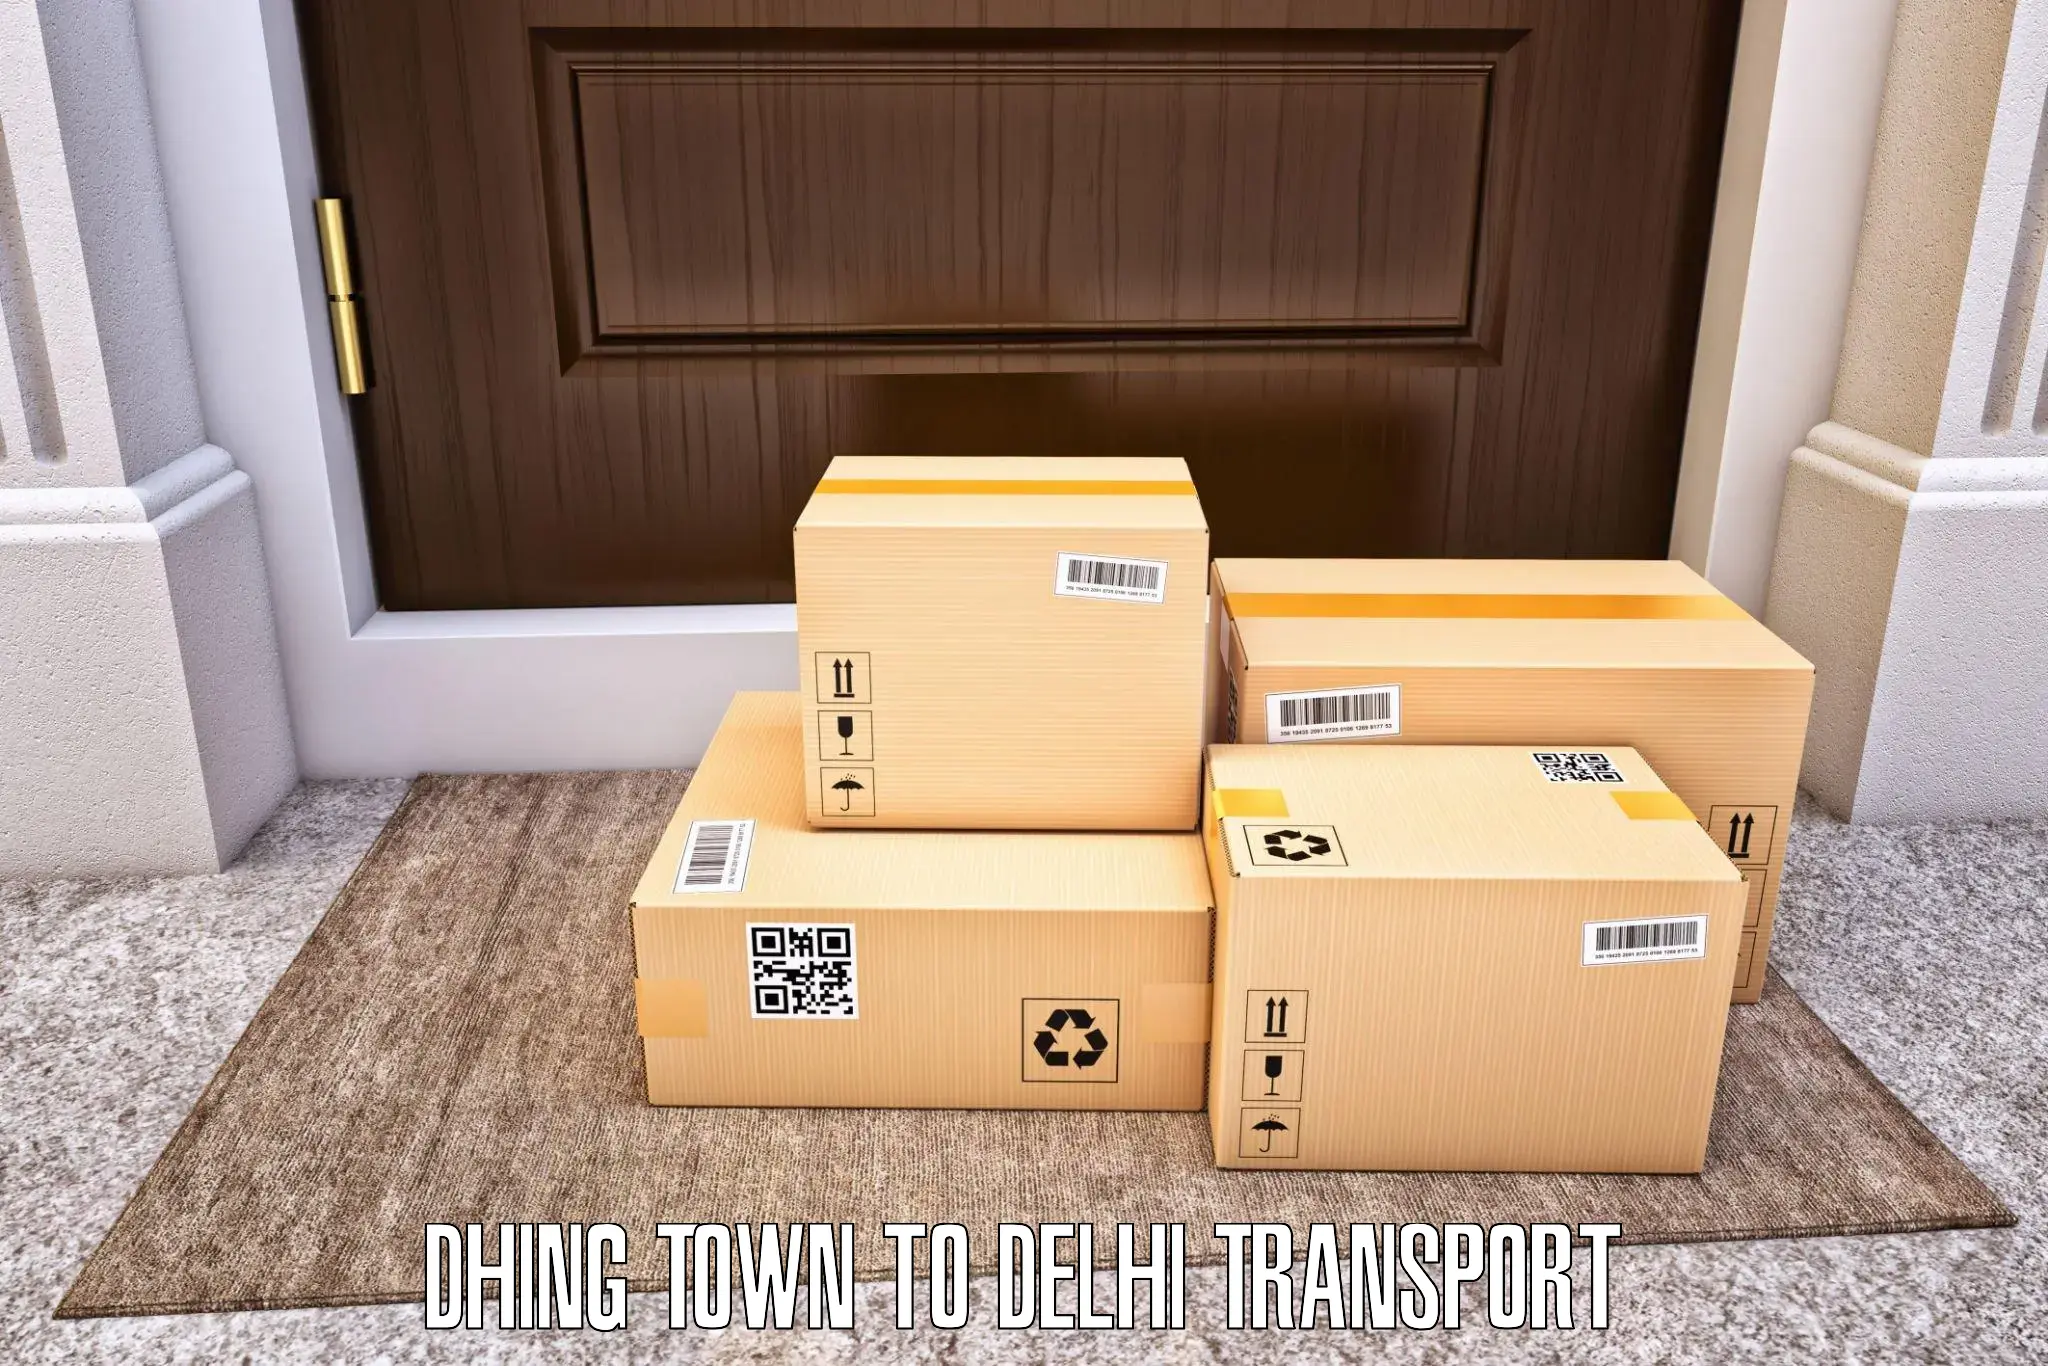 Parcel transport services Dhing Town to Lodhi Road